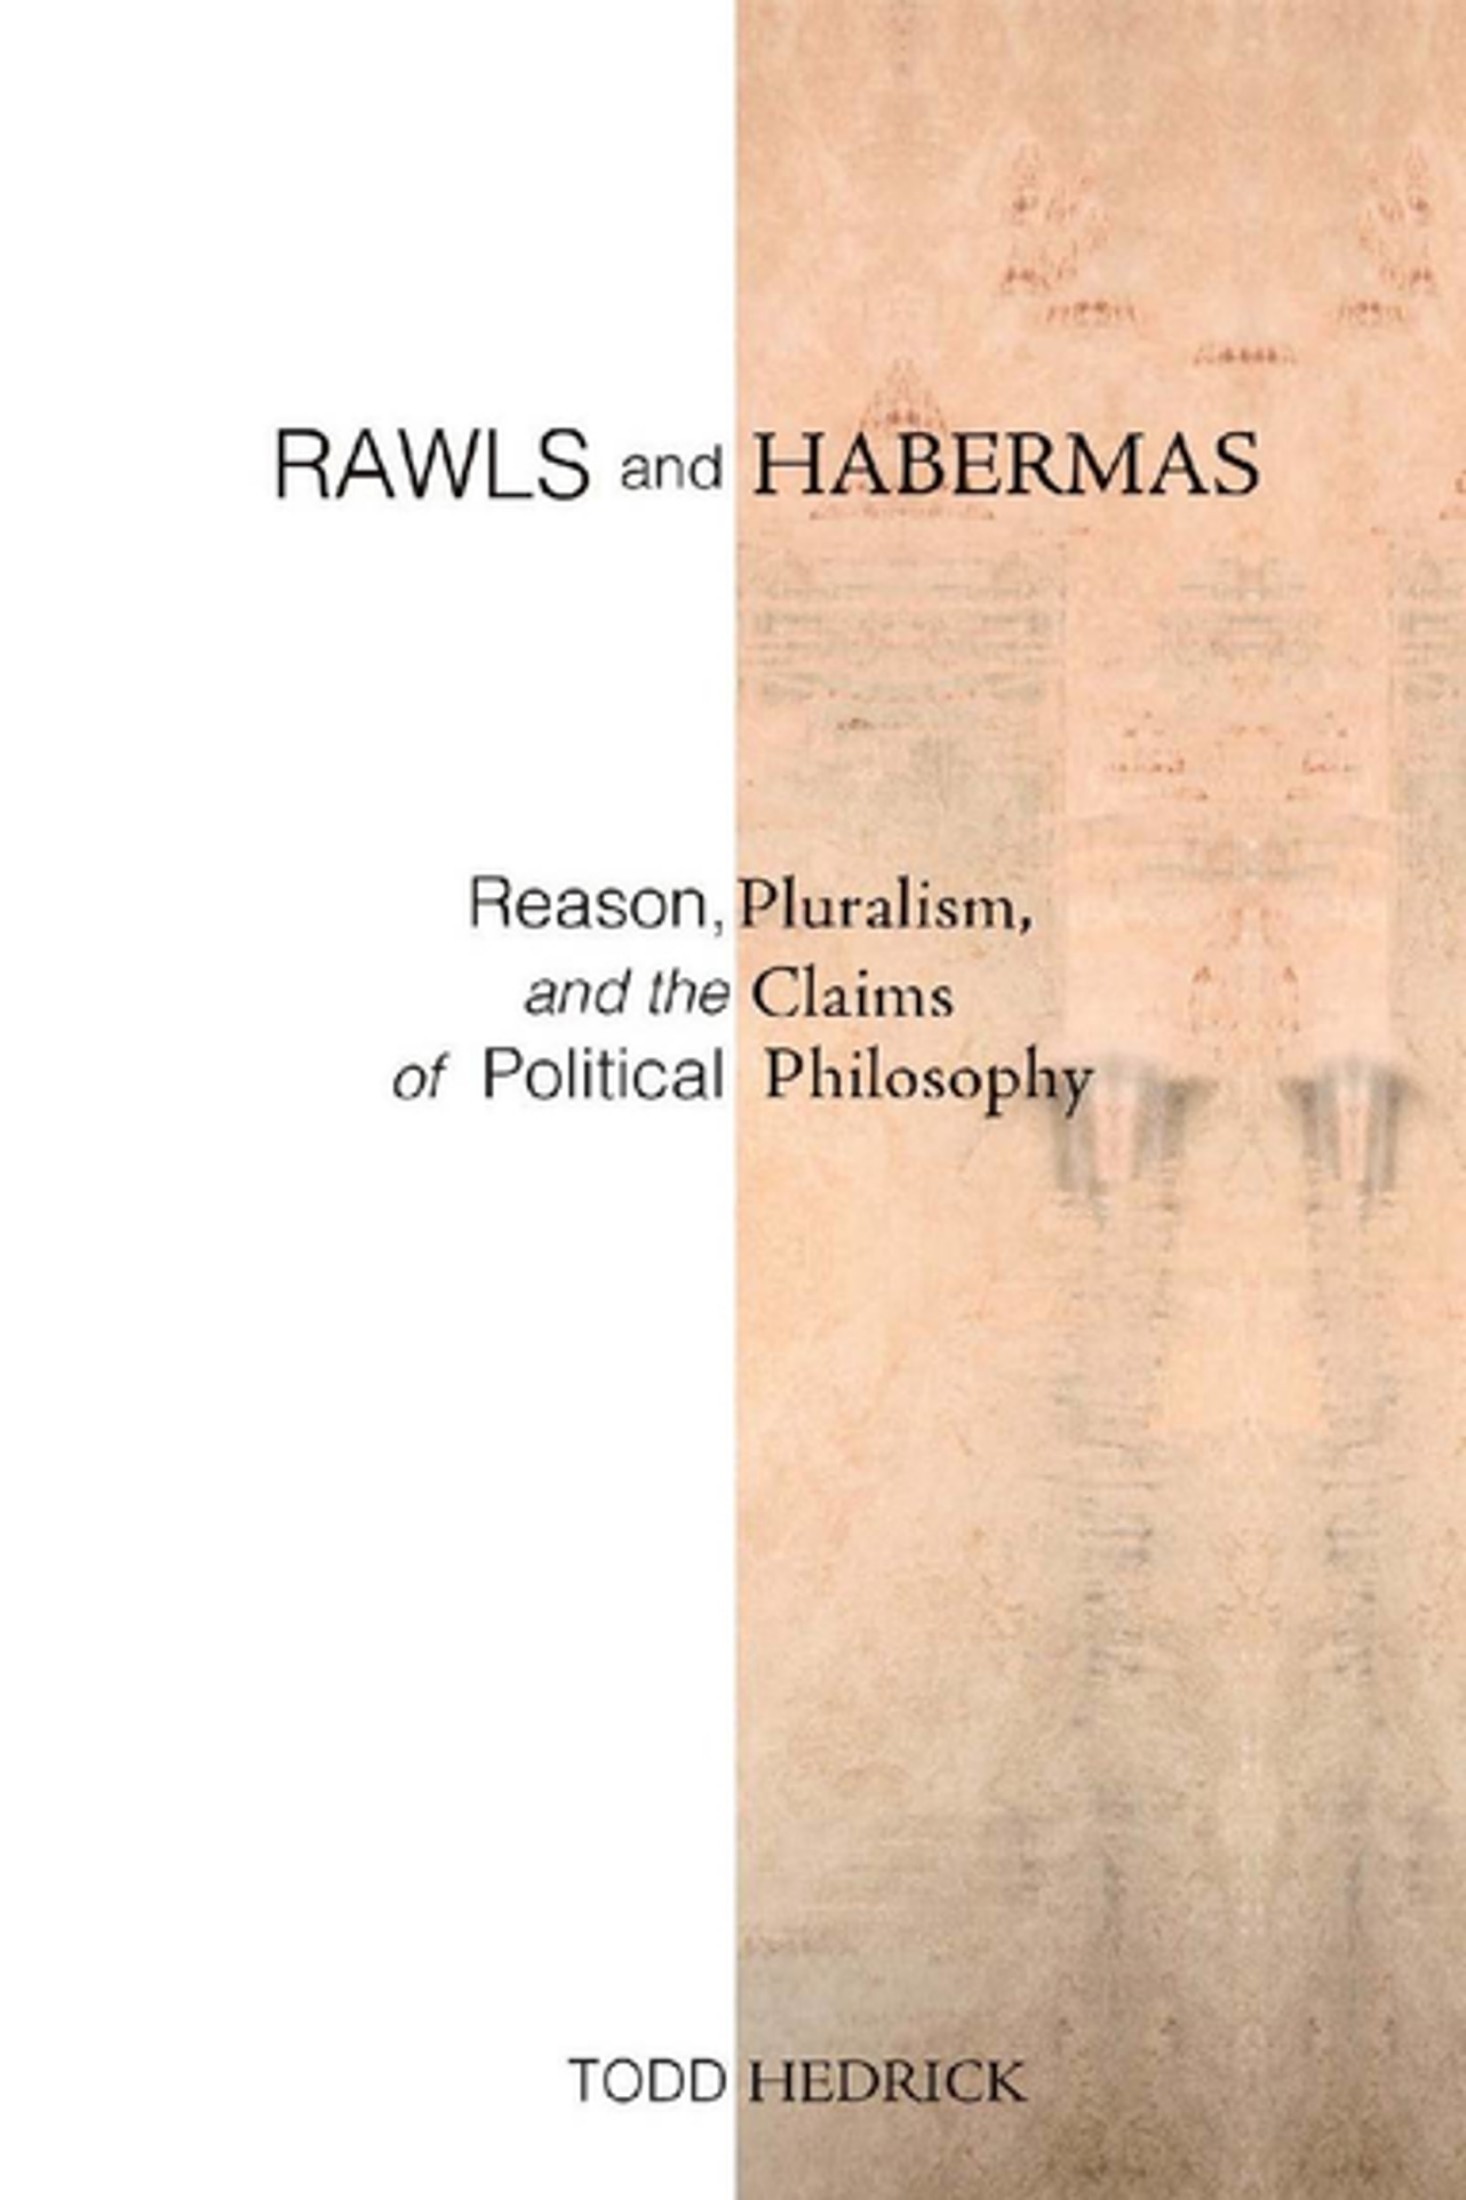 Rawls and Habermas: Reason, Pluralism, and the Claims of Political Philosophy